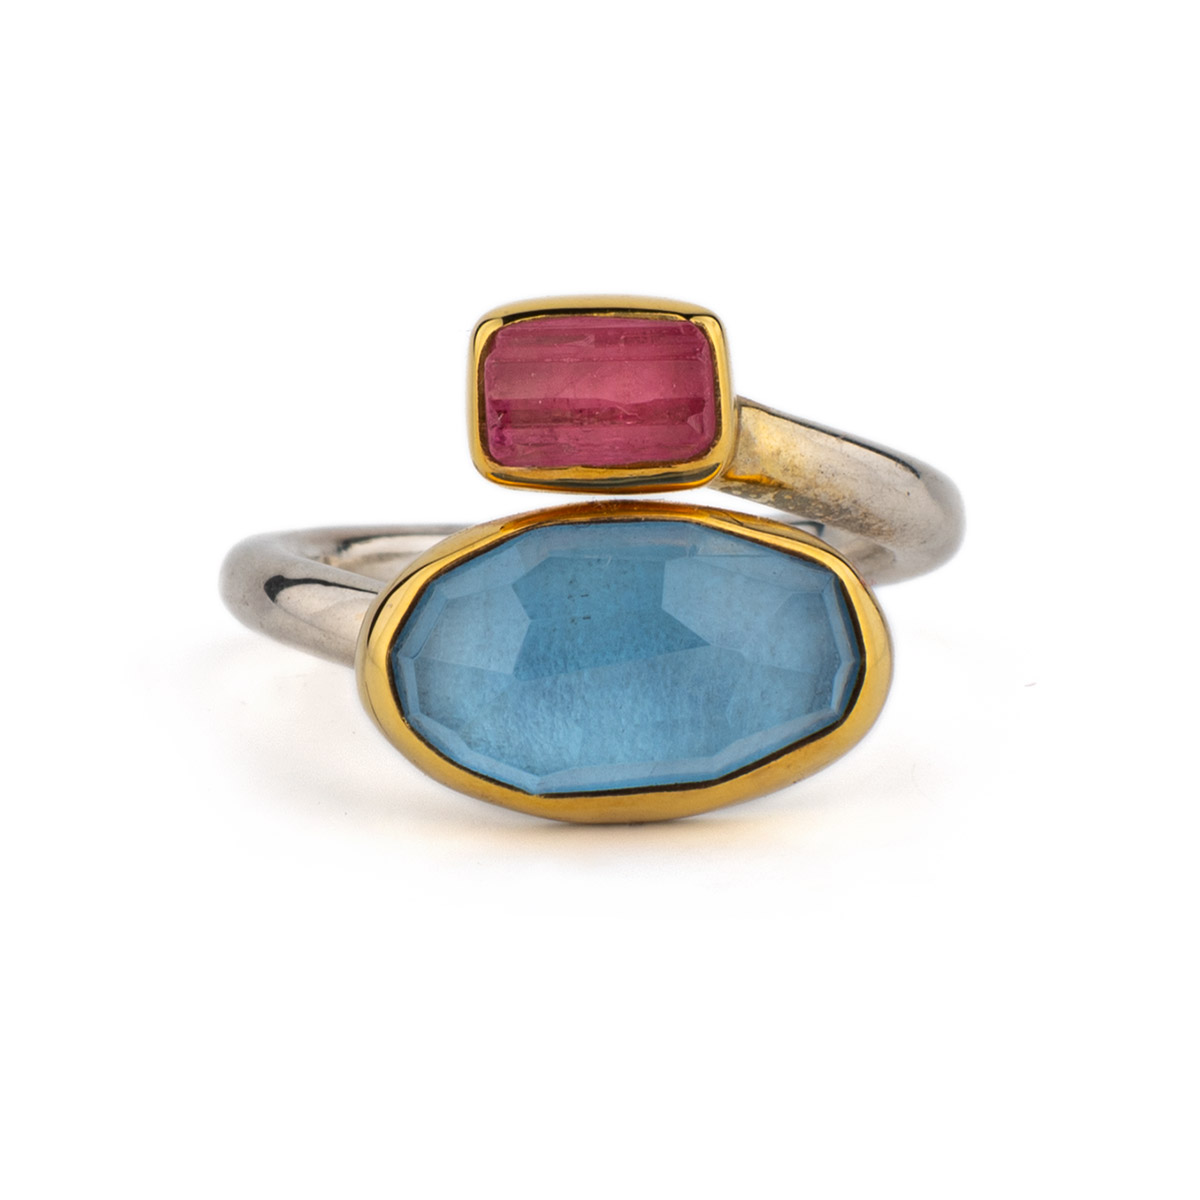 Aqua Marine and Tourmaline Ring - 18K Gold and 925 Sterling Silver - GREEK  ROOTS